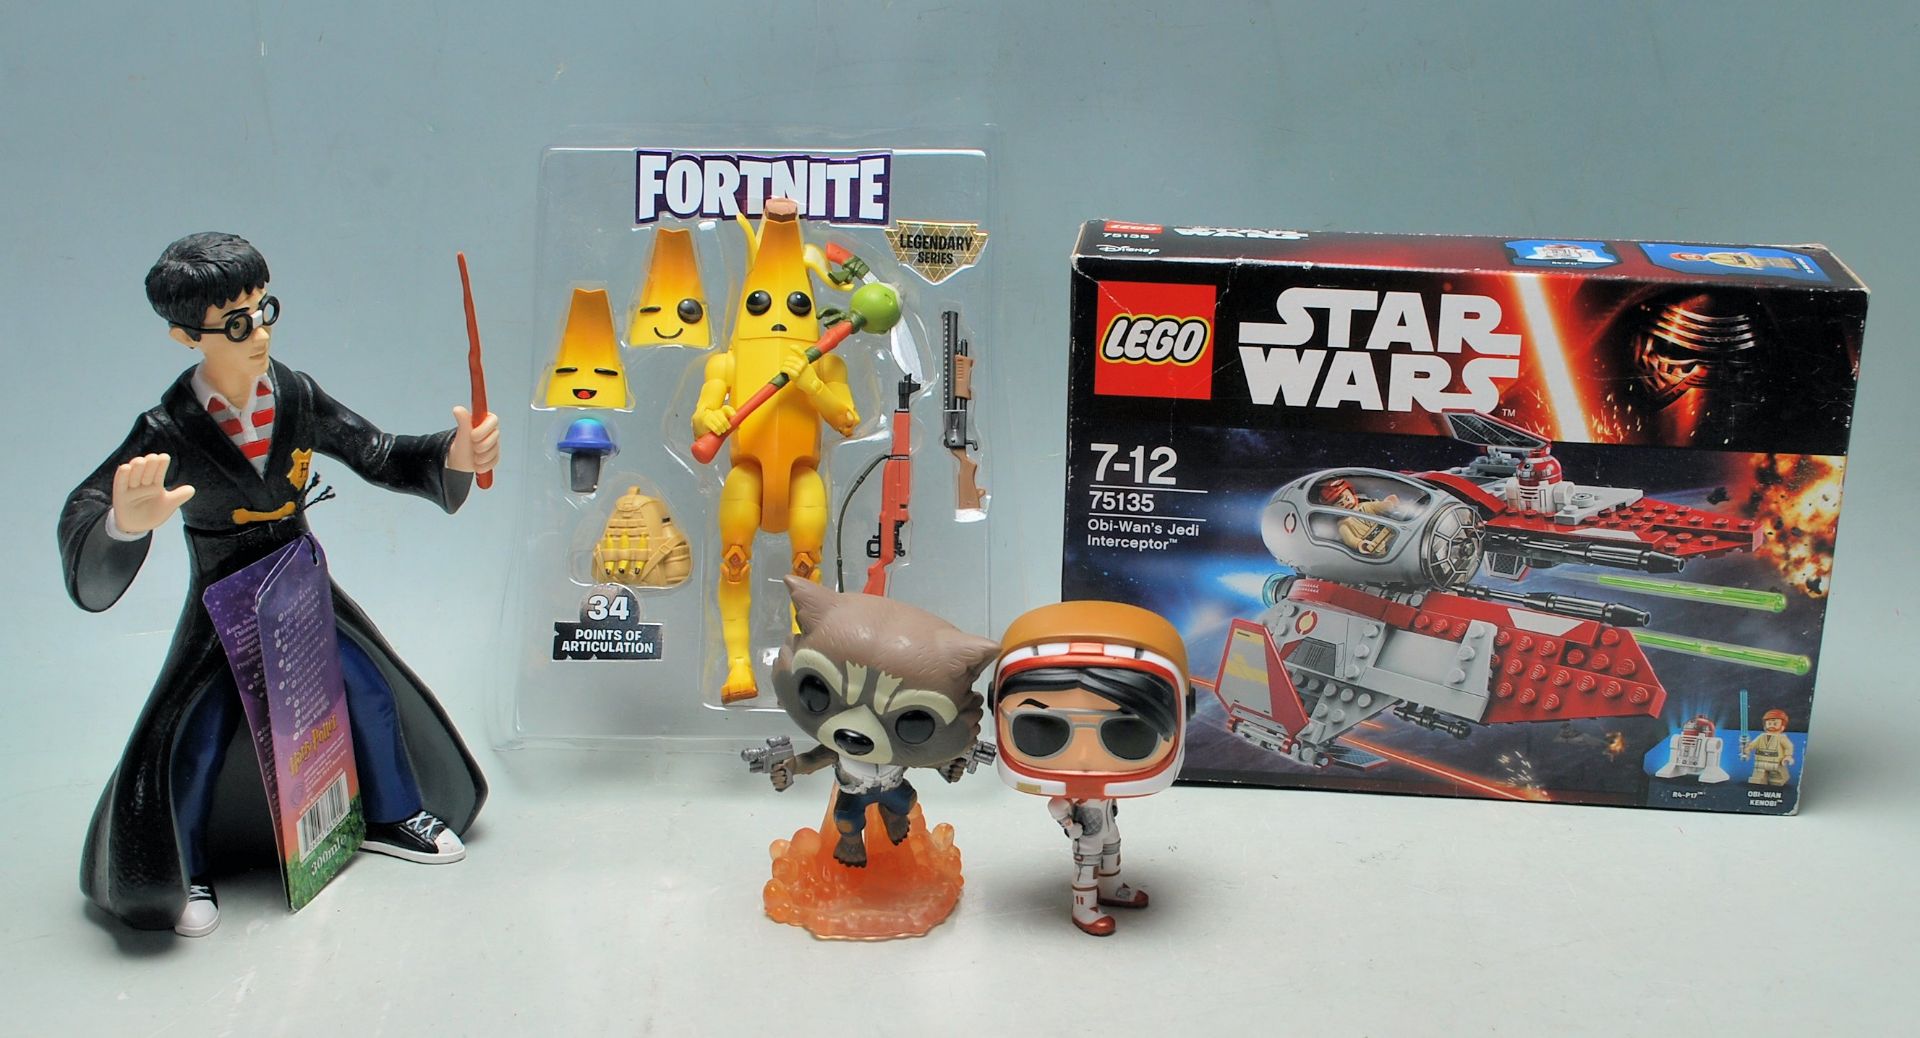 A COLLECTION OF EPIC LEGENDARY TOYS - FORTNITE - LEGO - HARRY POTTER - FUNKO POP